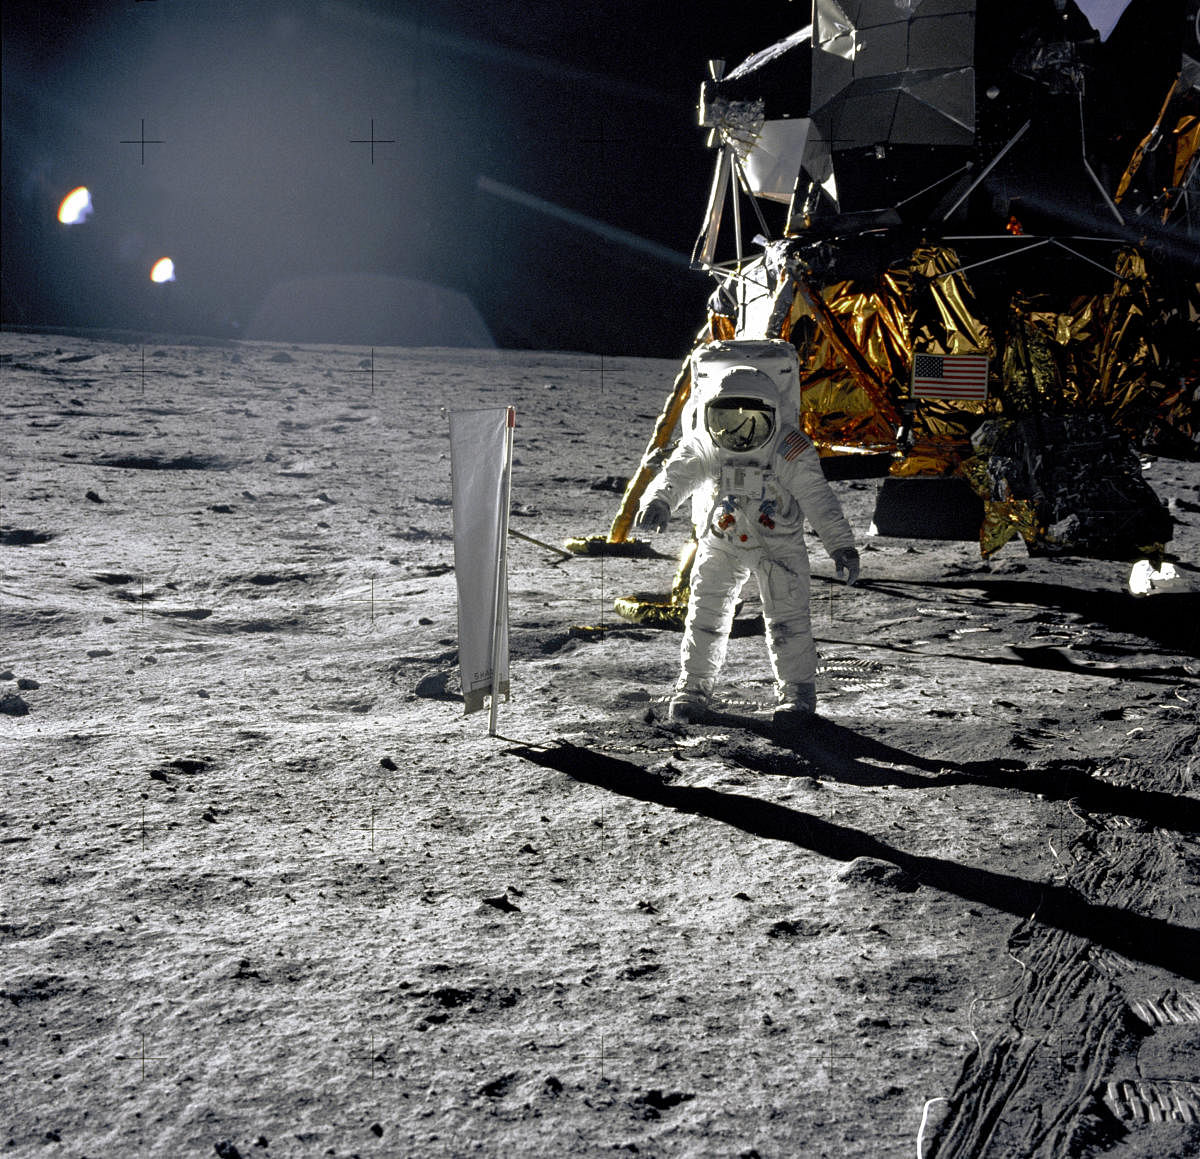 Moonscaped: Astronaut Edwin E. Aldrin, Jr., Lunar Module pilot, is photographed during the Apollo 11 extravehicular activity (EVA) on the lunar surface. In the right background is the Lunar Module "Eagle." On Aldrin's right is the Solar Wind Composition (SWC) experiment already deployed. This p hotograph was taken by Neil A. Armstrong with a 70mm lunar surface camera. (NASA)